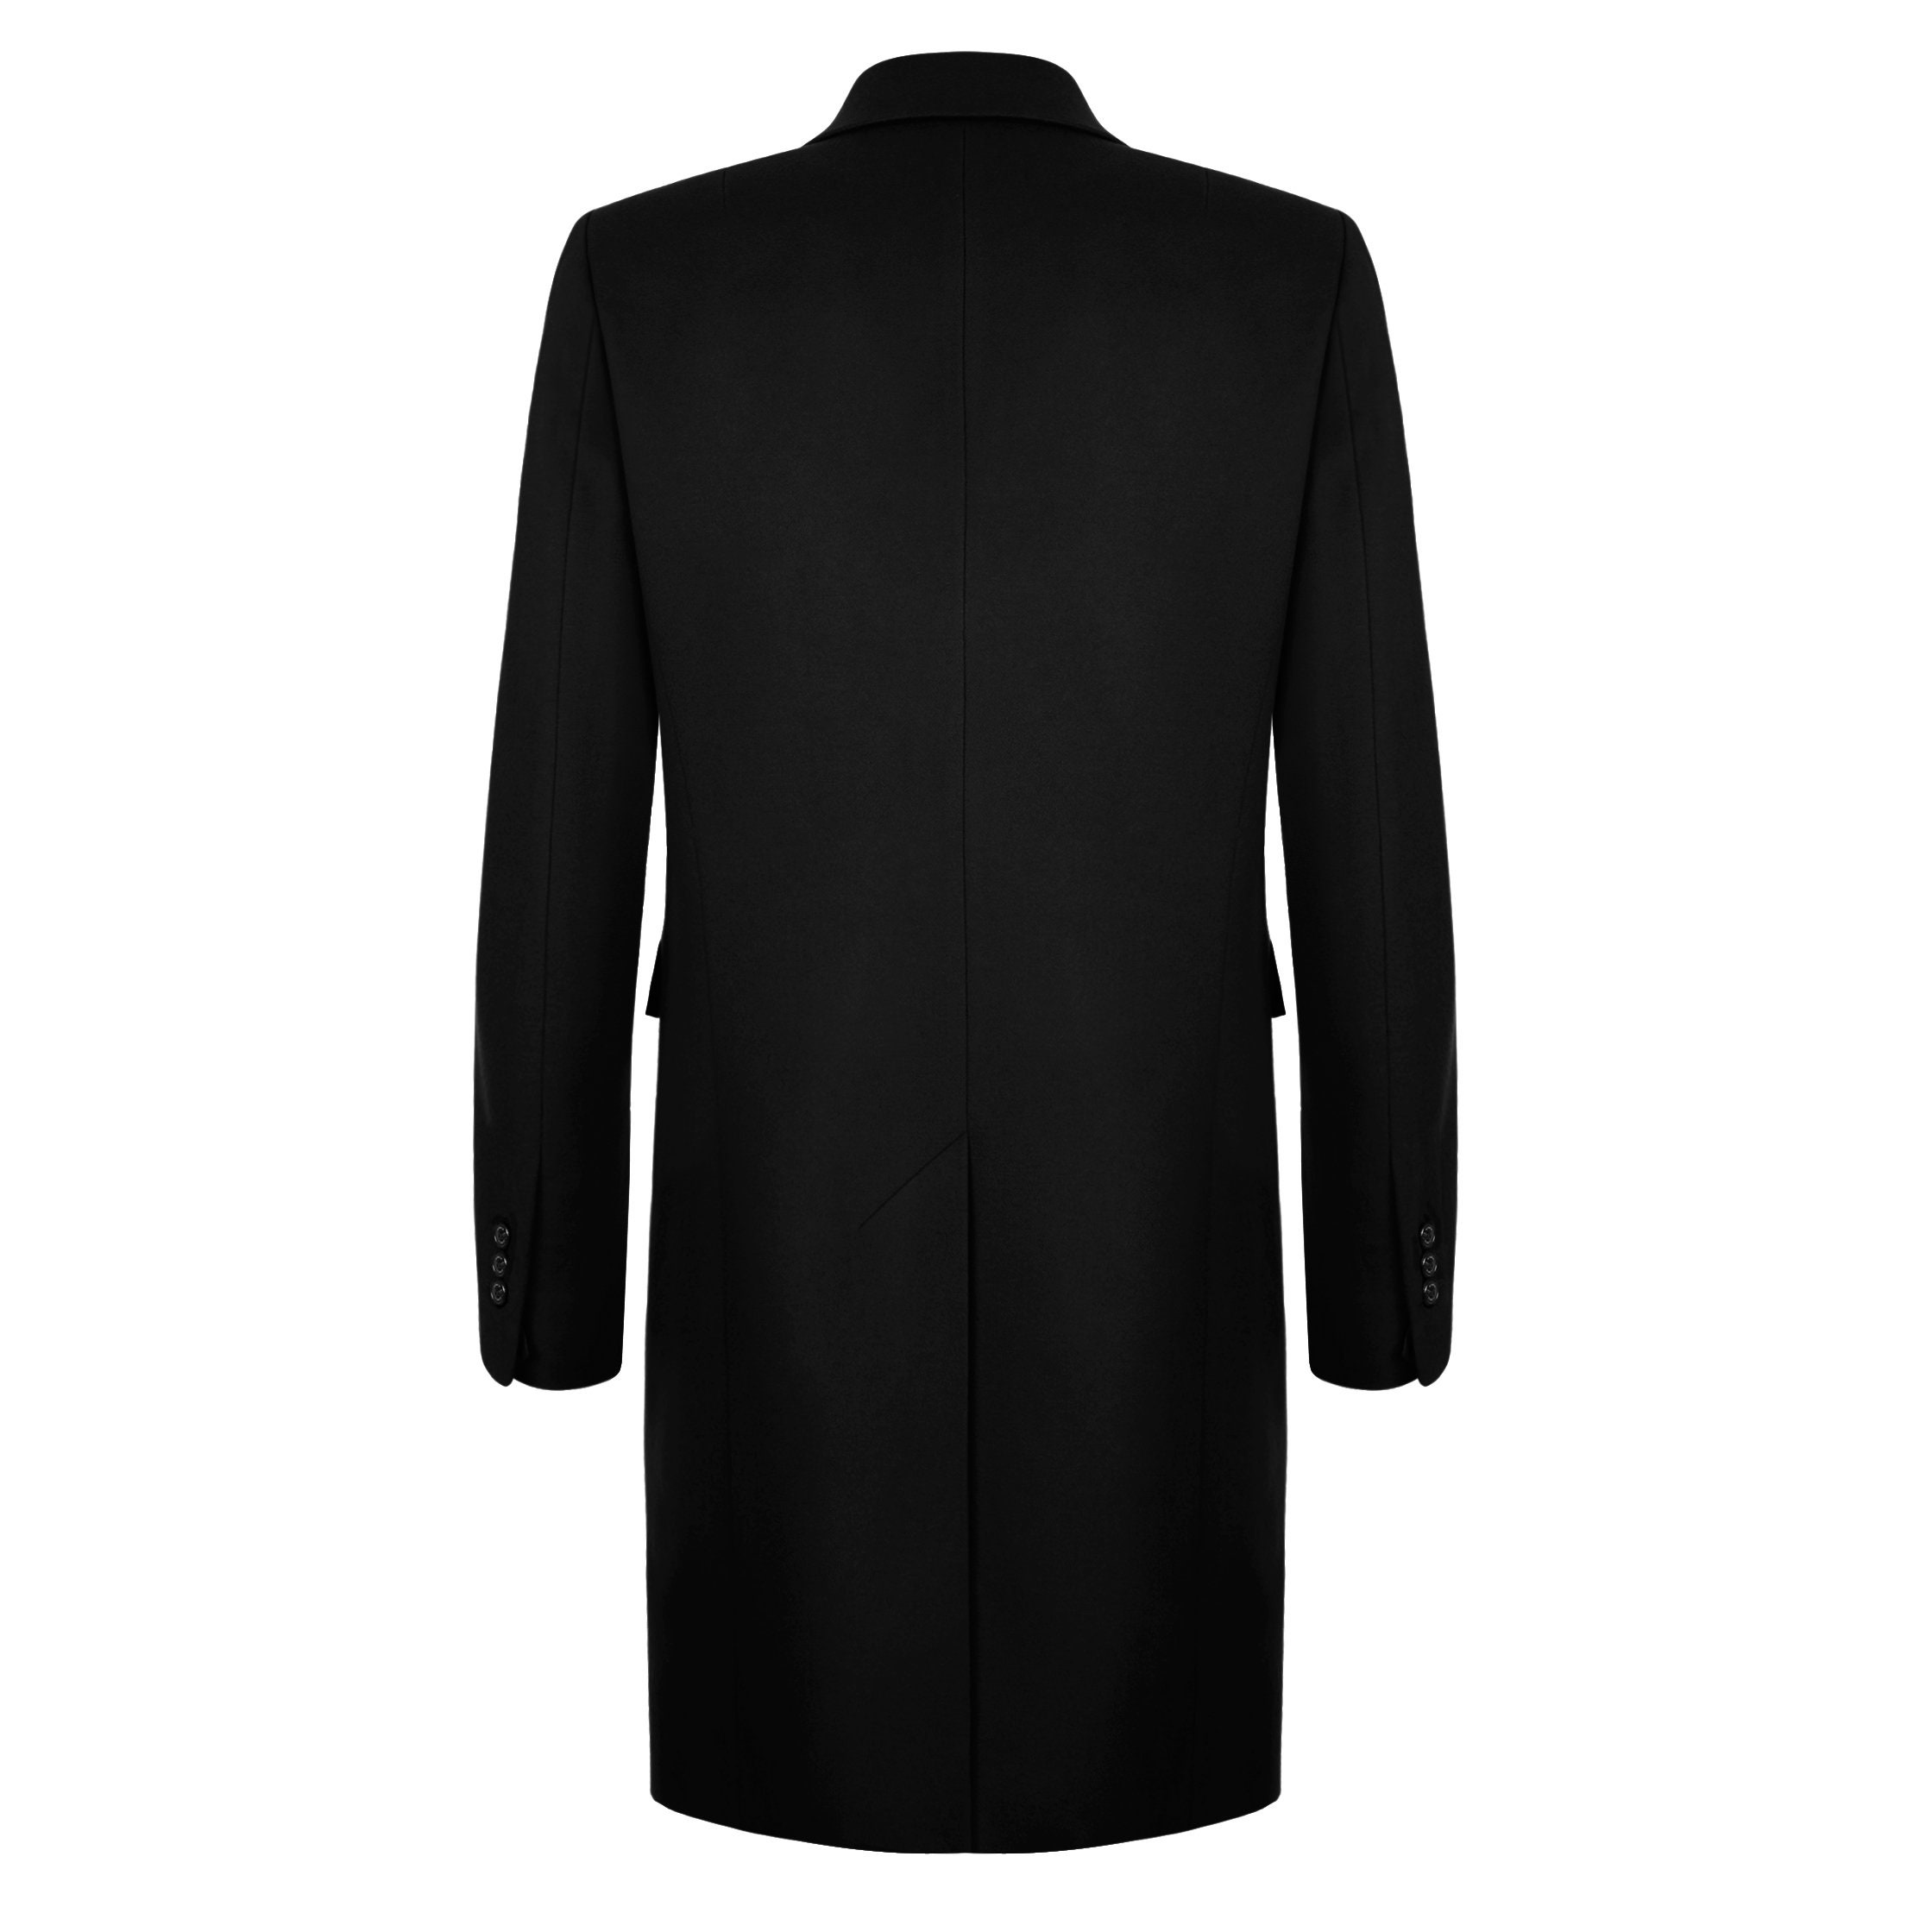 Cashmere Coat Double Breasted Black - Etsy